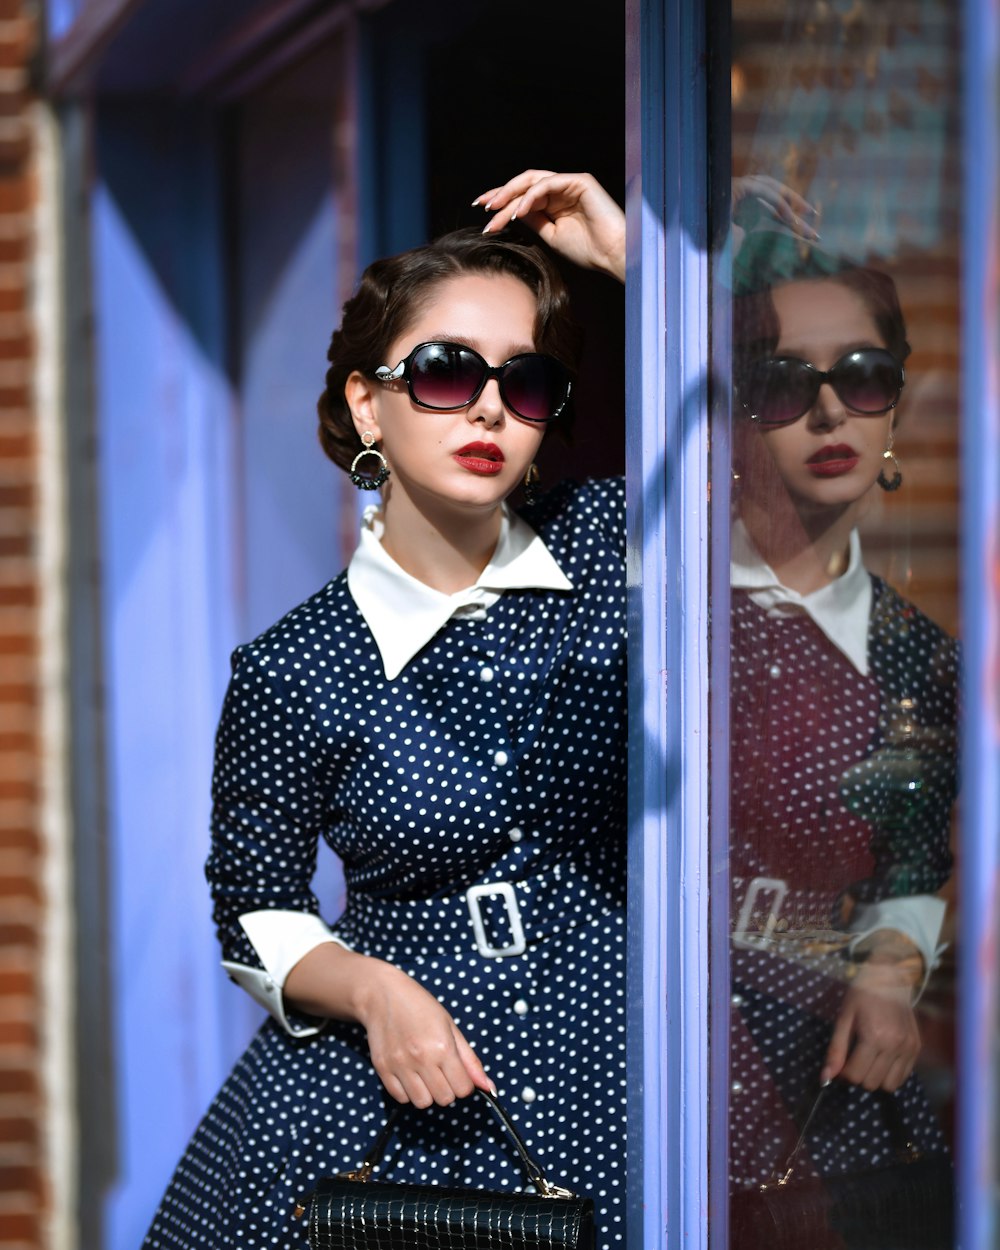 a woman in a dress and sunglasses leaning against a window